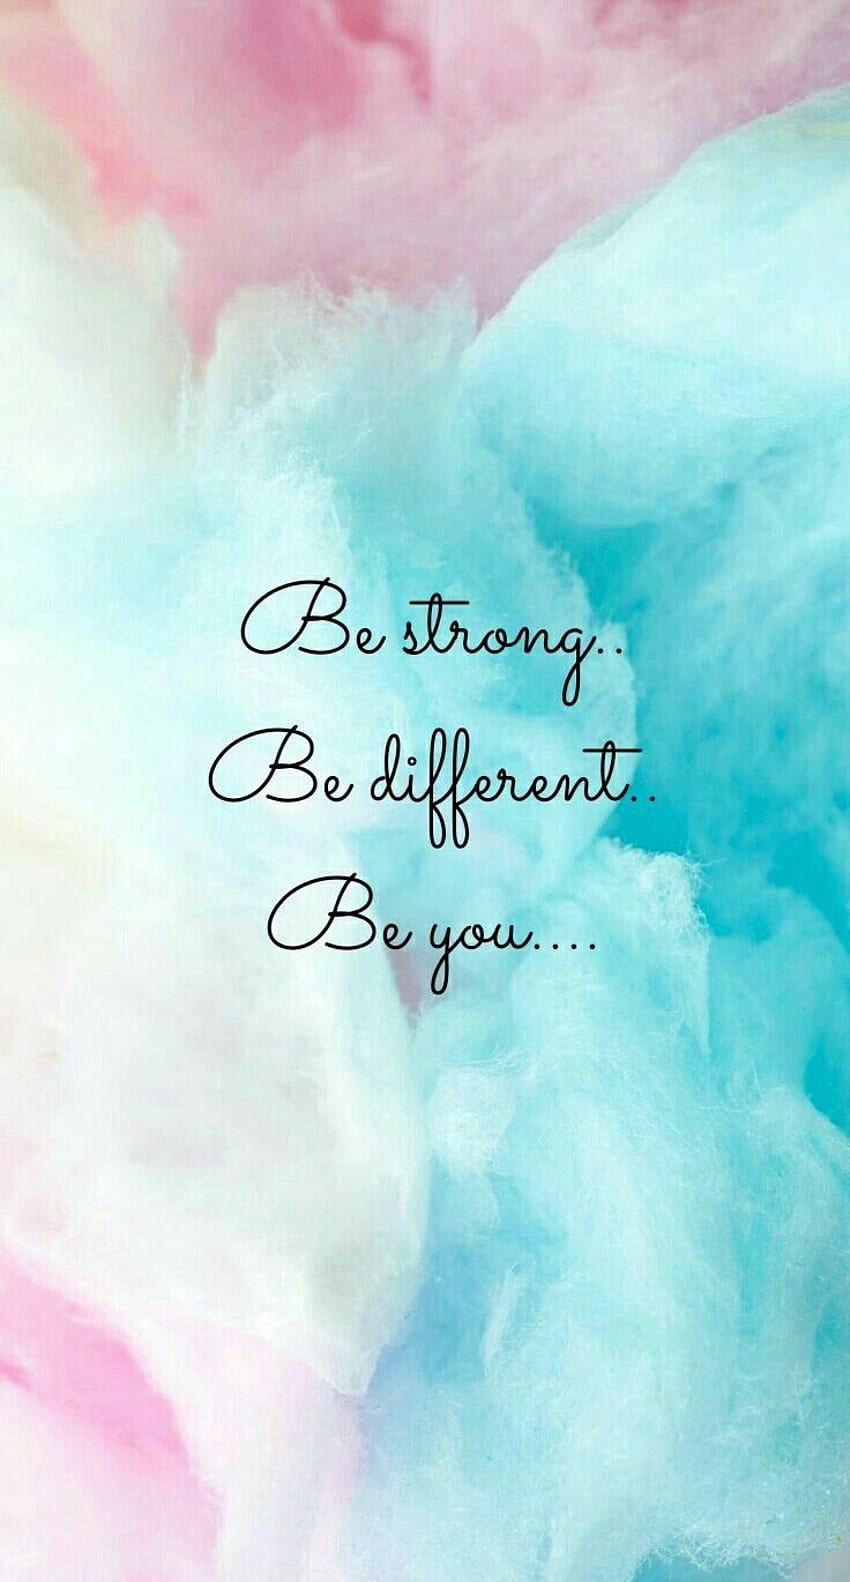 Be strong. Be different. Be you. inspirational quotes HD phone wallpaper